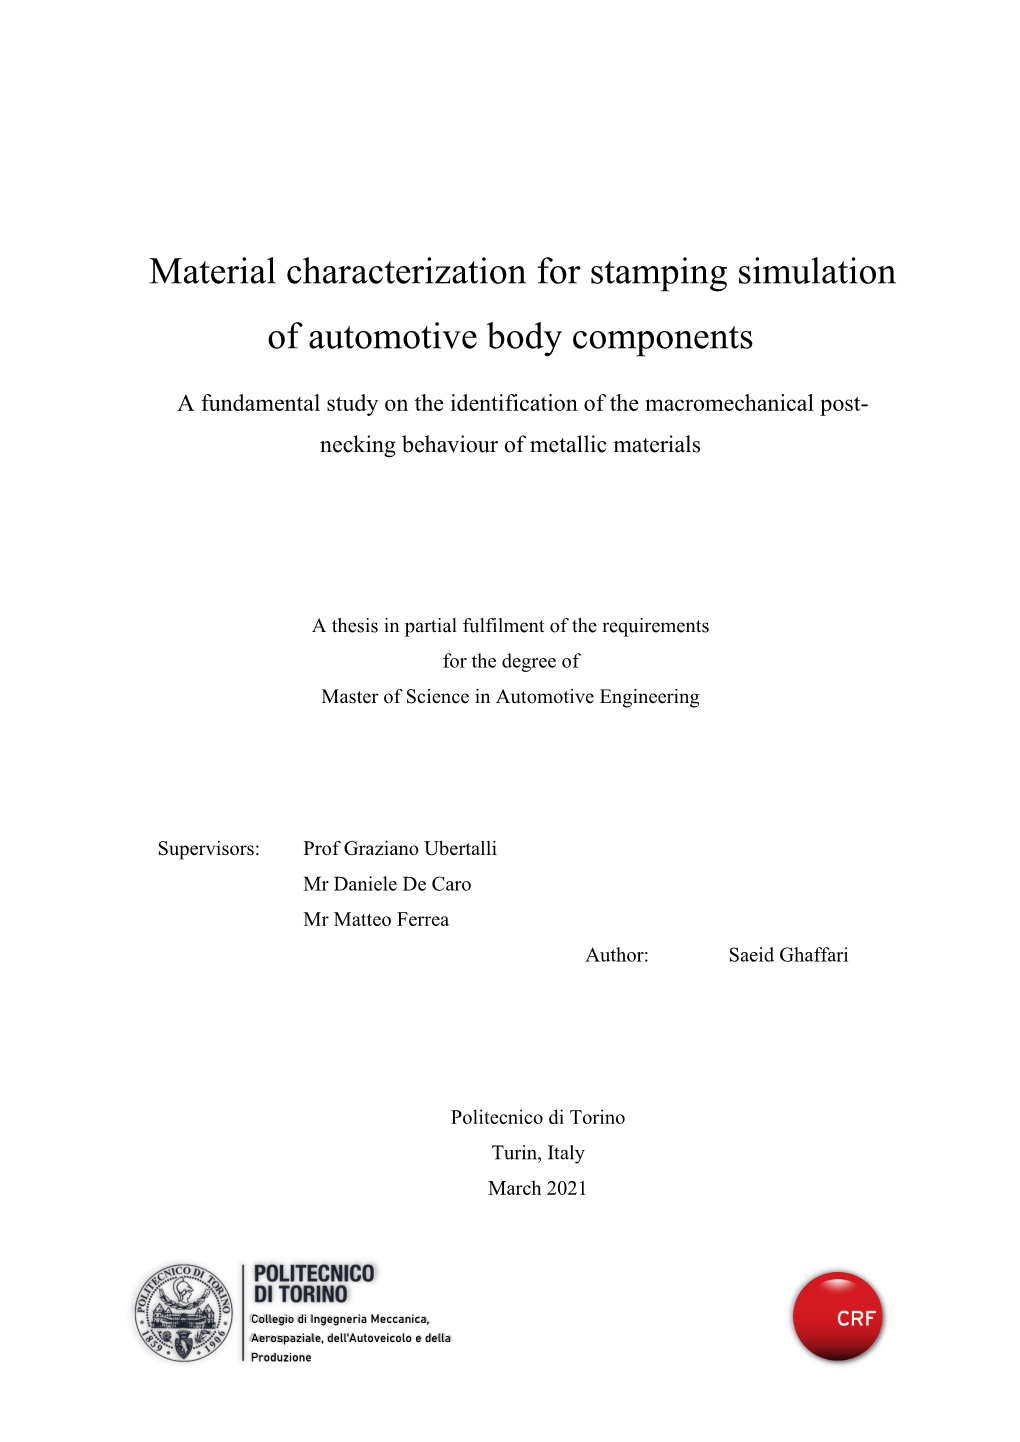 Material Characterization for Stamping Simulation of Automotive Body Components